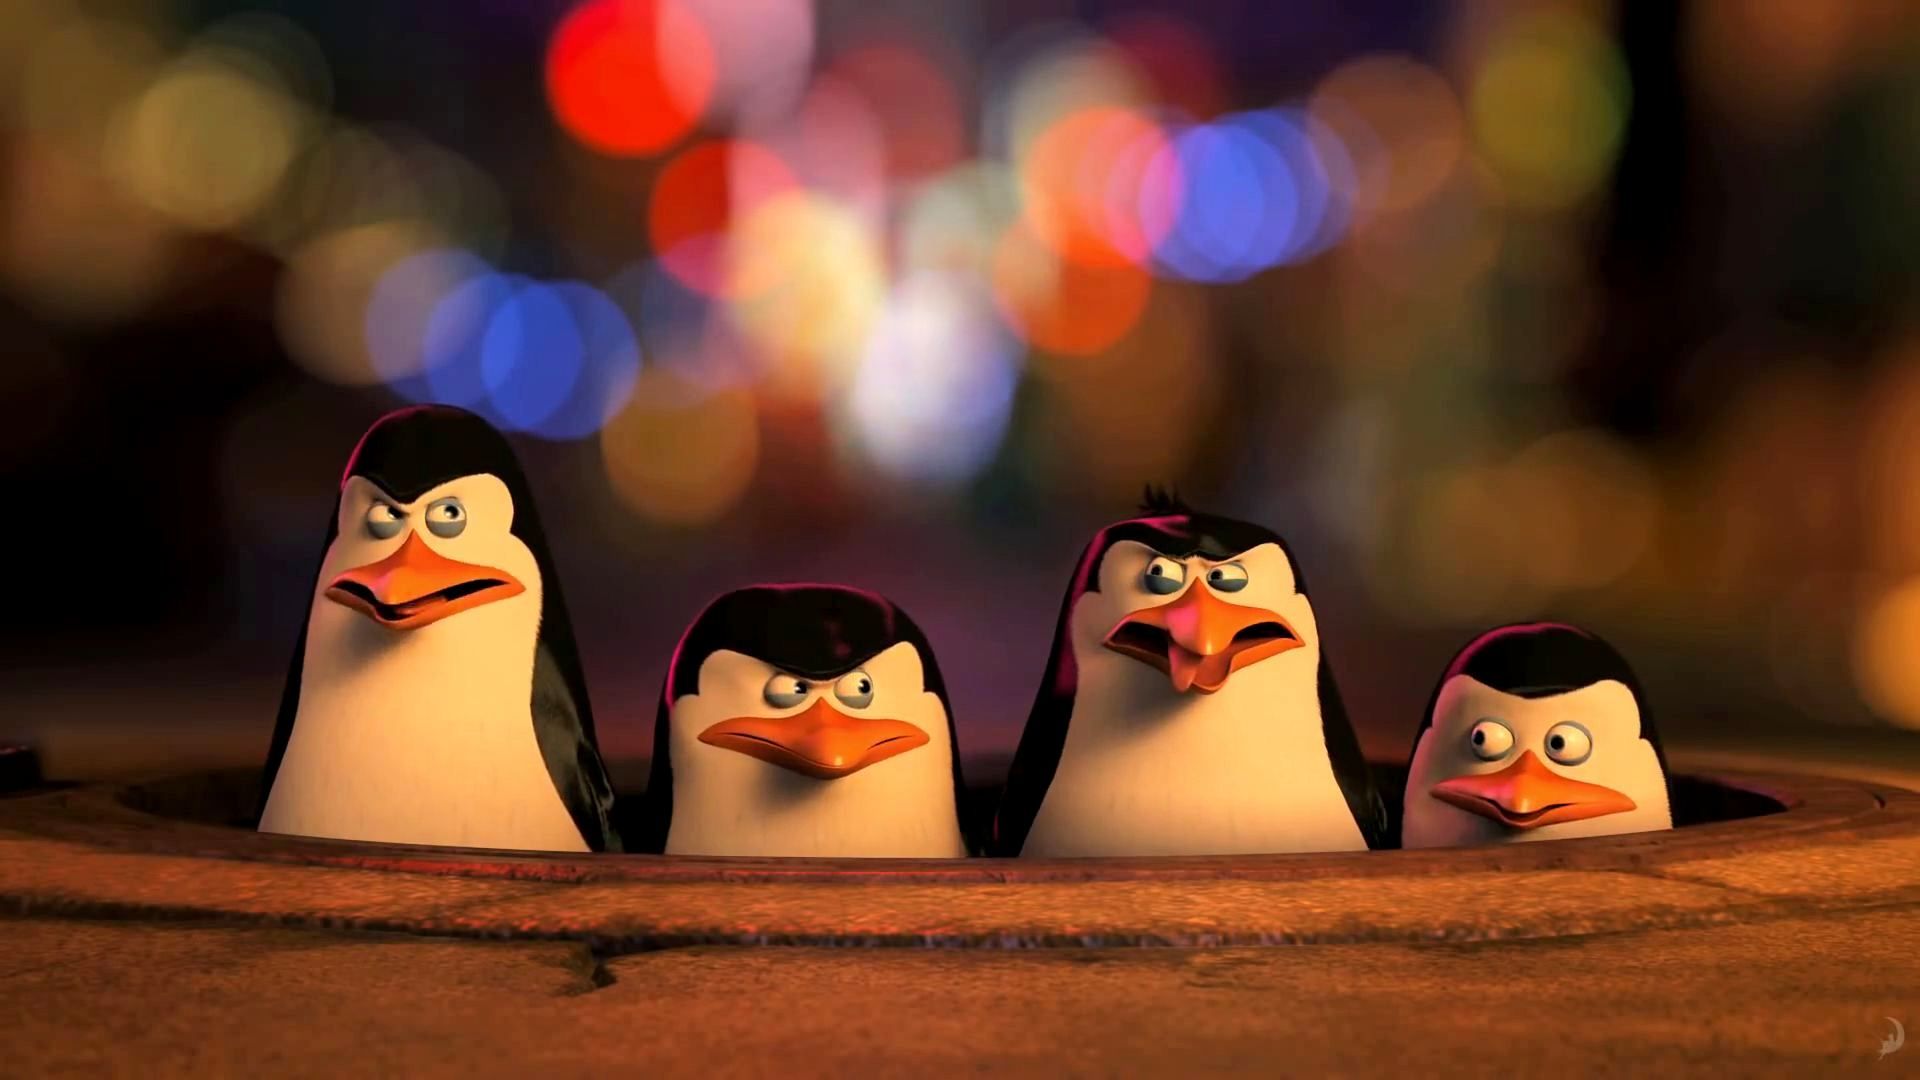 Penguins of Madagascar Movie wallpapers HD | Hollywood ...